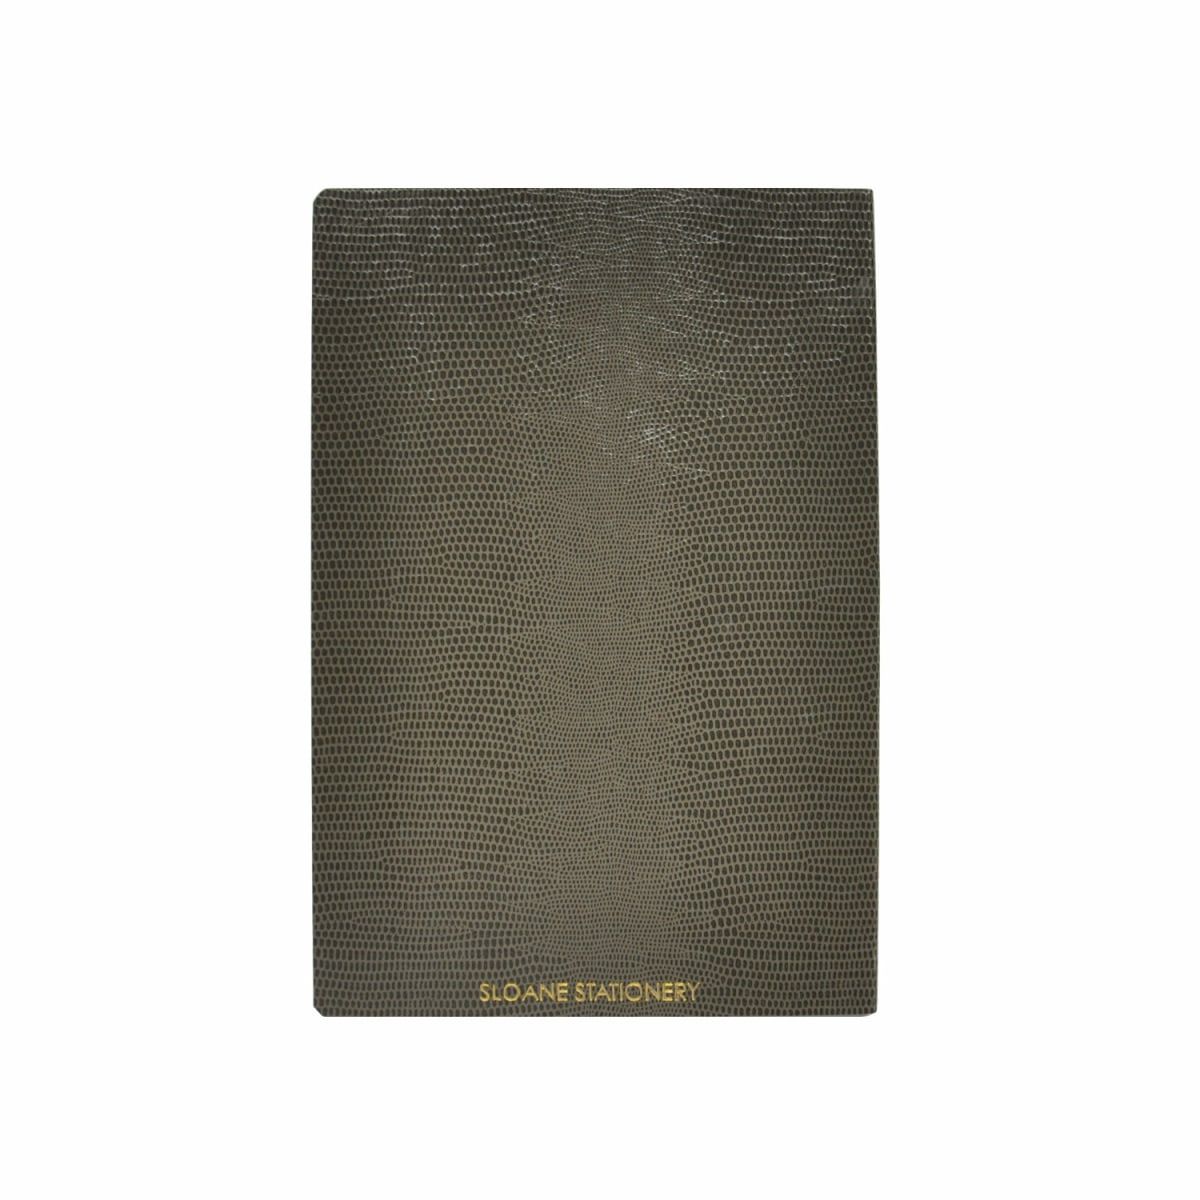 'Geek Chic' Softcover Notebook | Wolf & Badger (US)